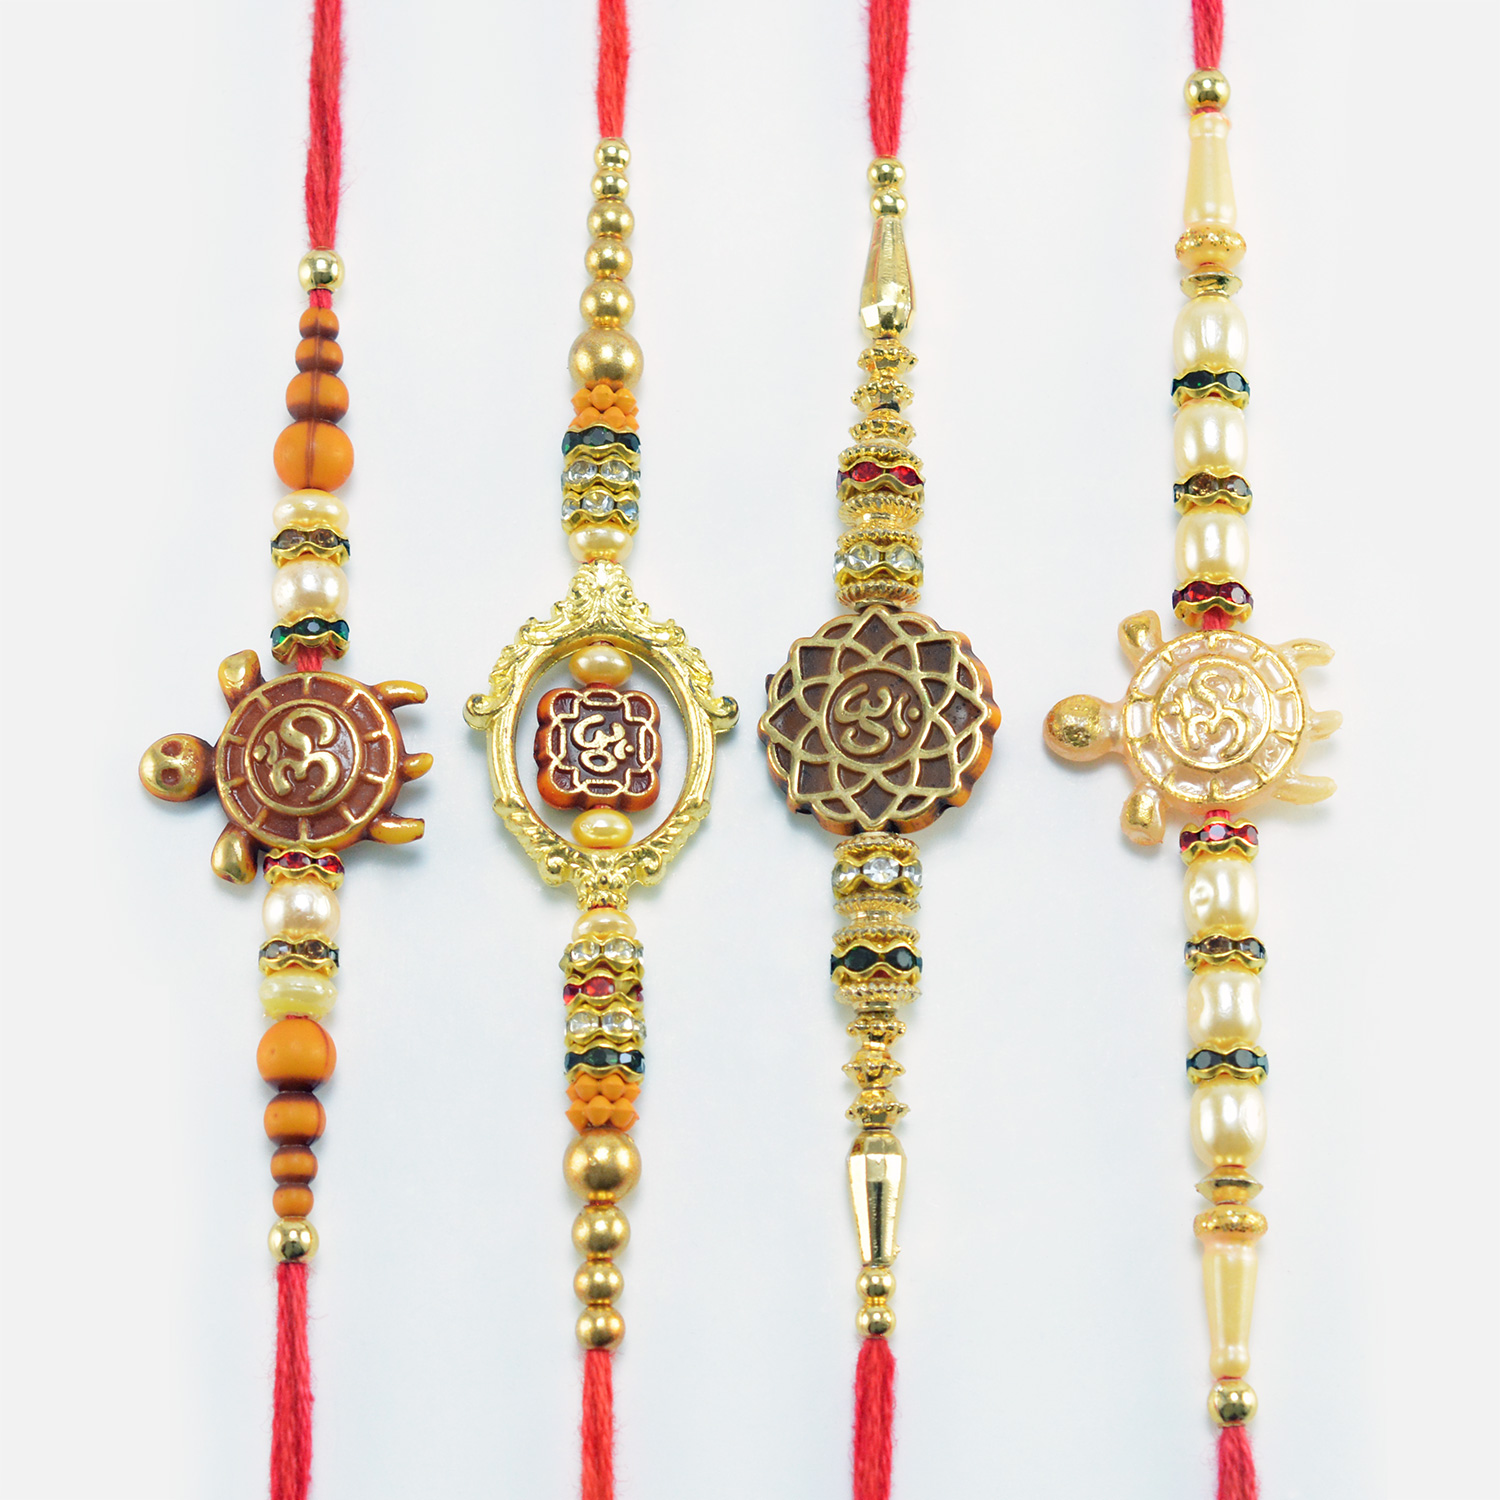 Two Small Lucky Tortoise and Two Holy Sacred Rakhi Set of 4 Brother Rakhis